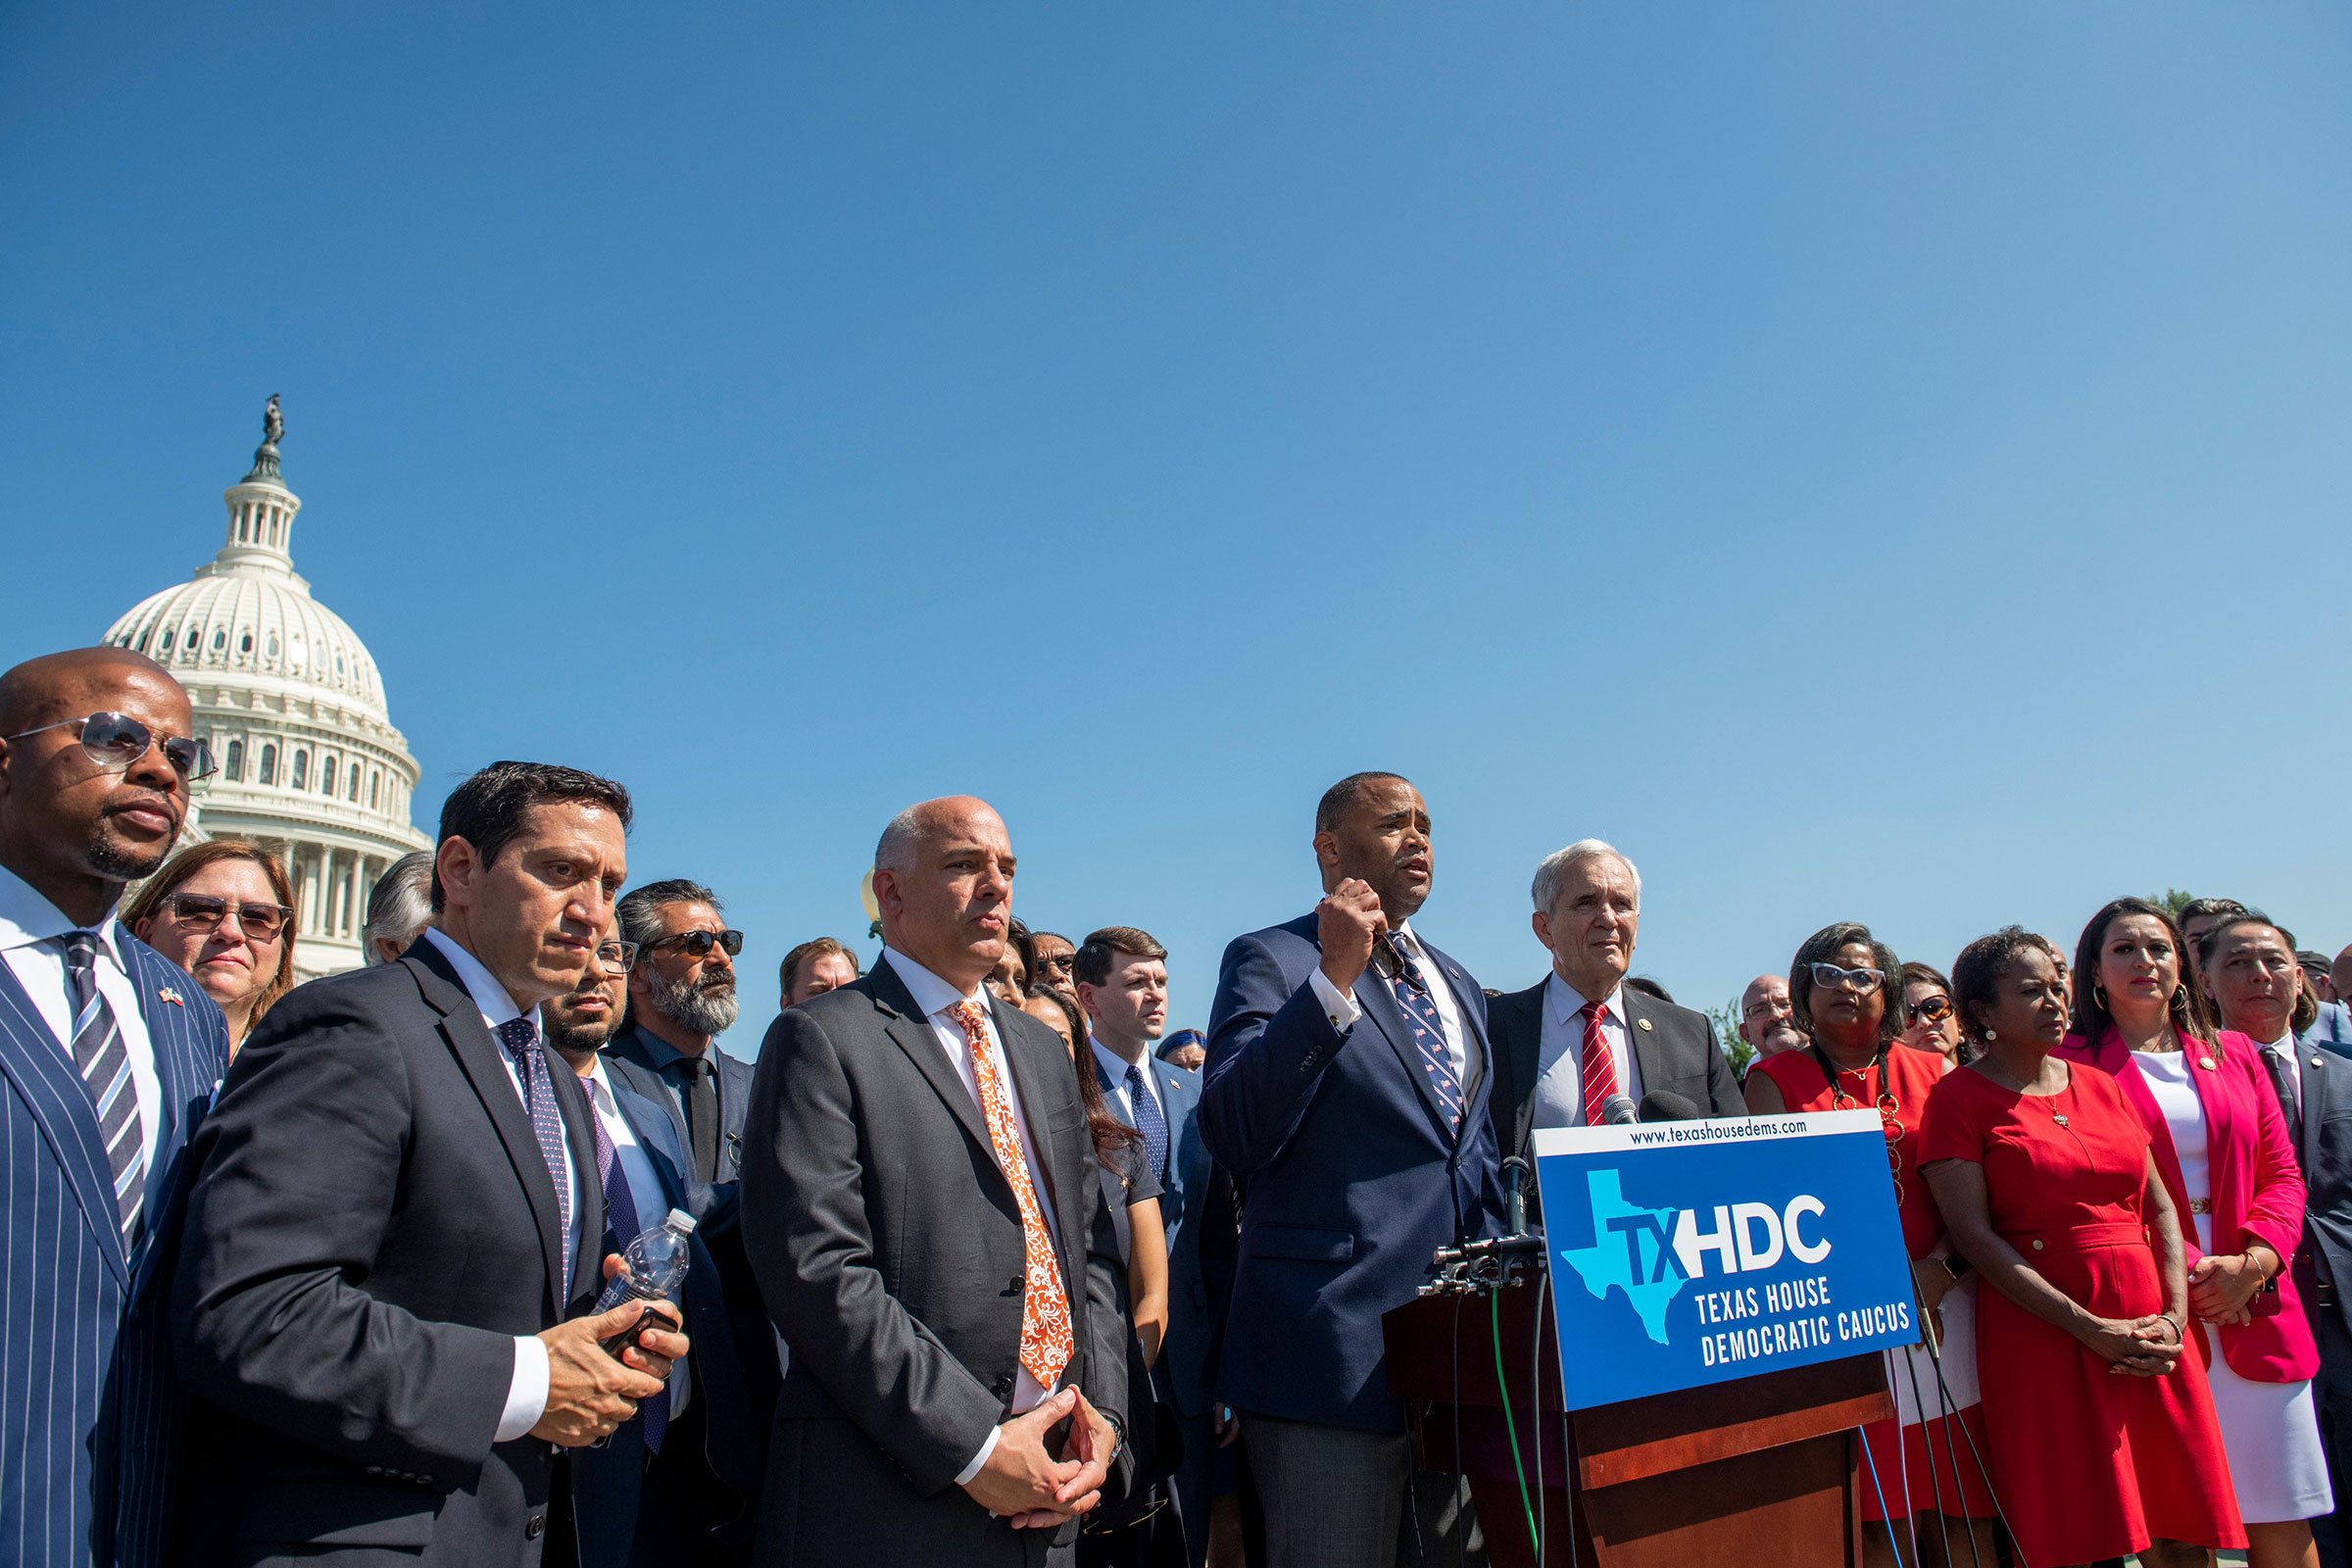 Members of the Texas legislature hold a press conference on voting rights outside the US Capitol, Washington, District of Columbia, USA - 13 Jul 2021